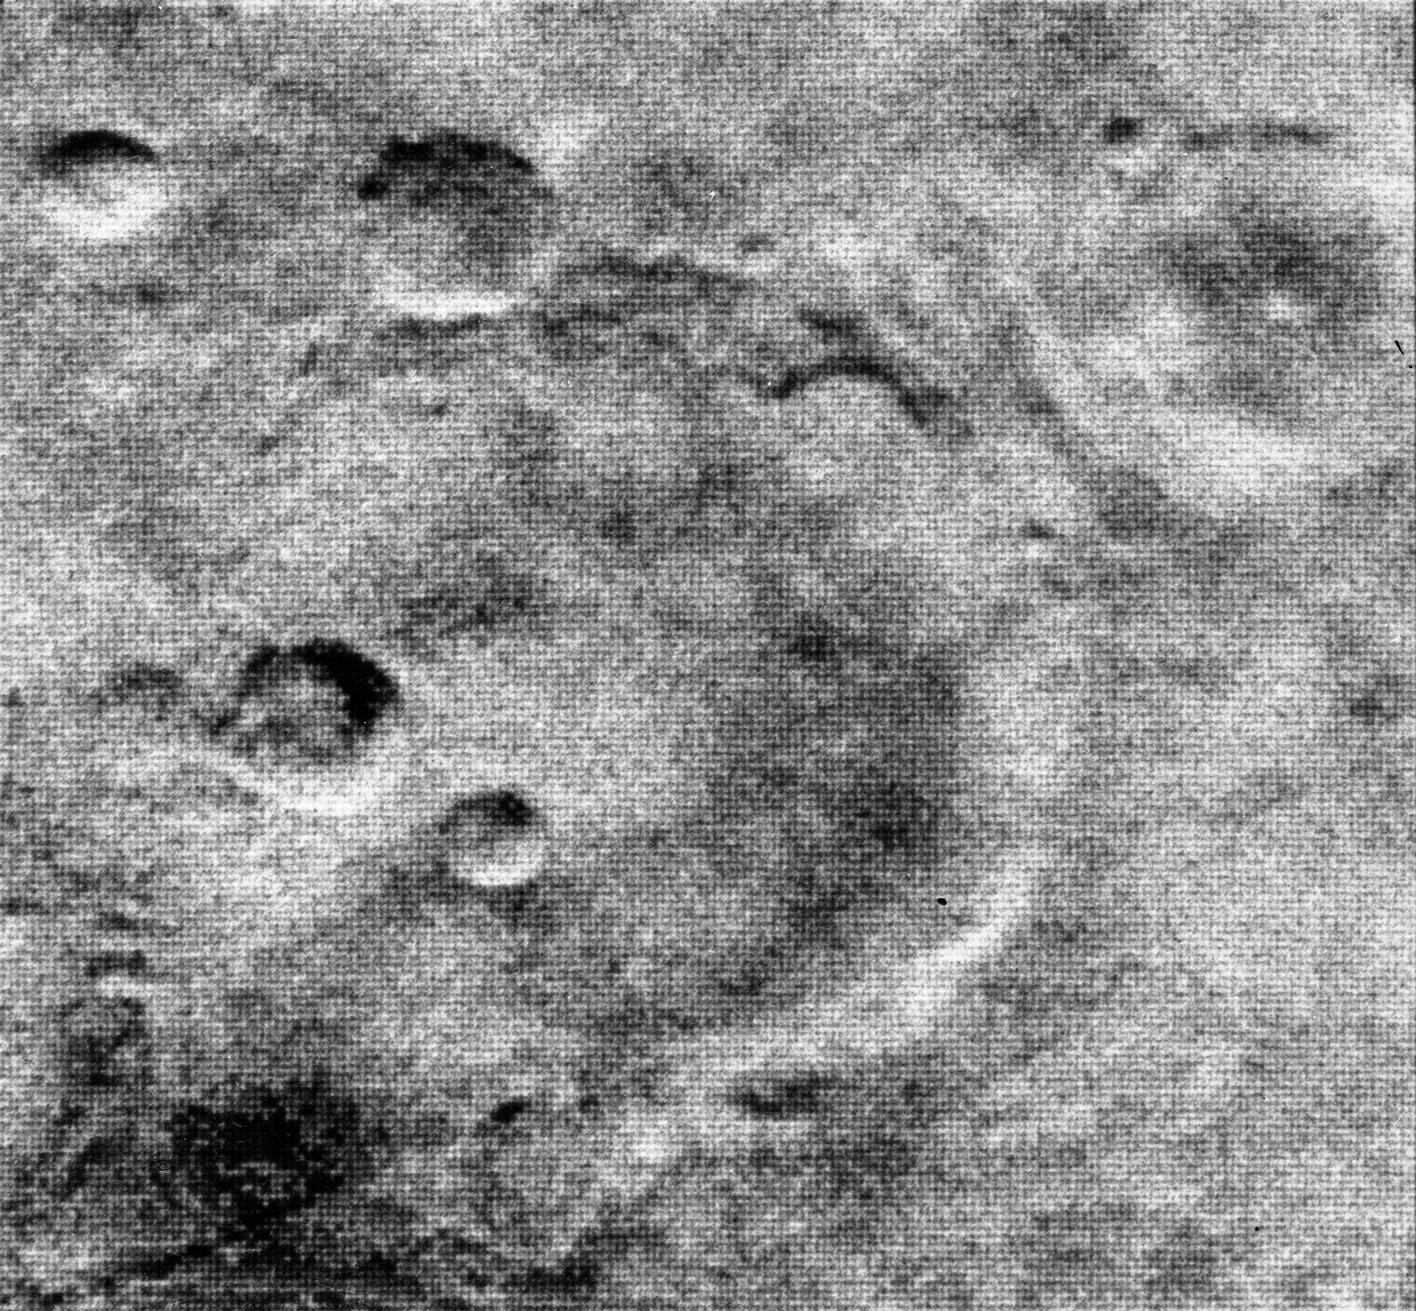 The Mariner 4 spacecrafts first images of a crater named "Mariner."